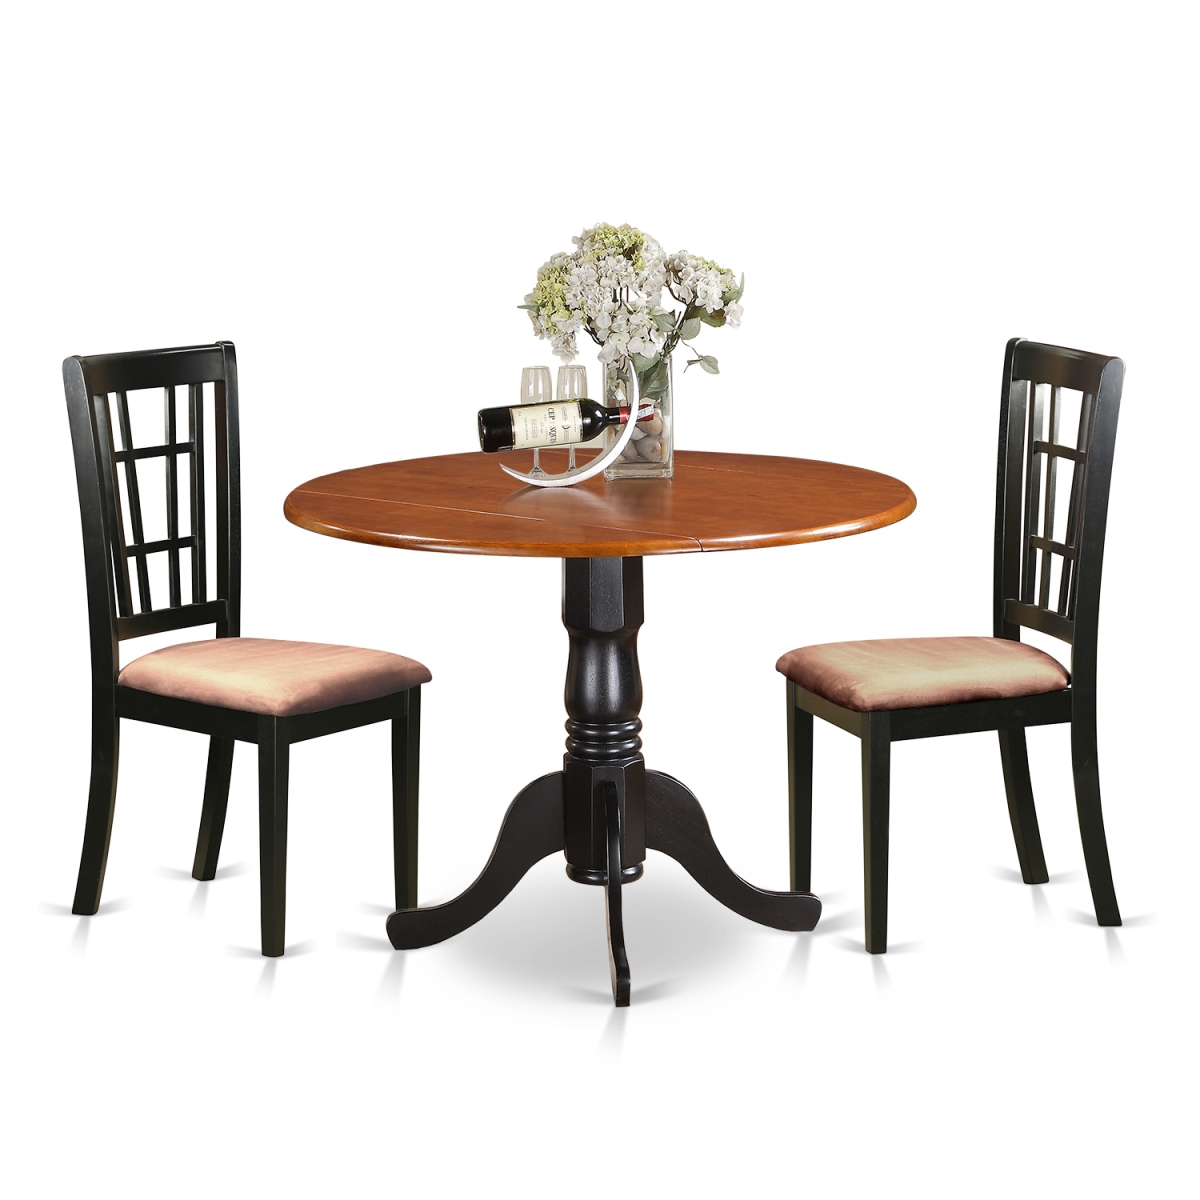 Picture of East West Furniture DLNI3-BCH-C Microfiber Dublin Kitchen Table Set - Dining Table & 2 Solid Wood Chairs, Black & Cherry - 3 Piece